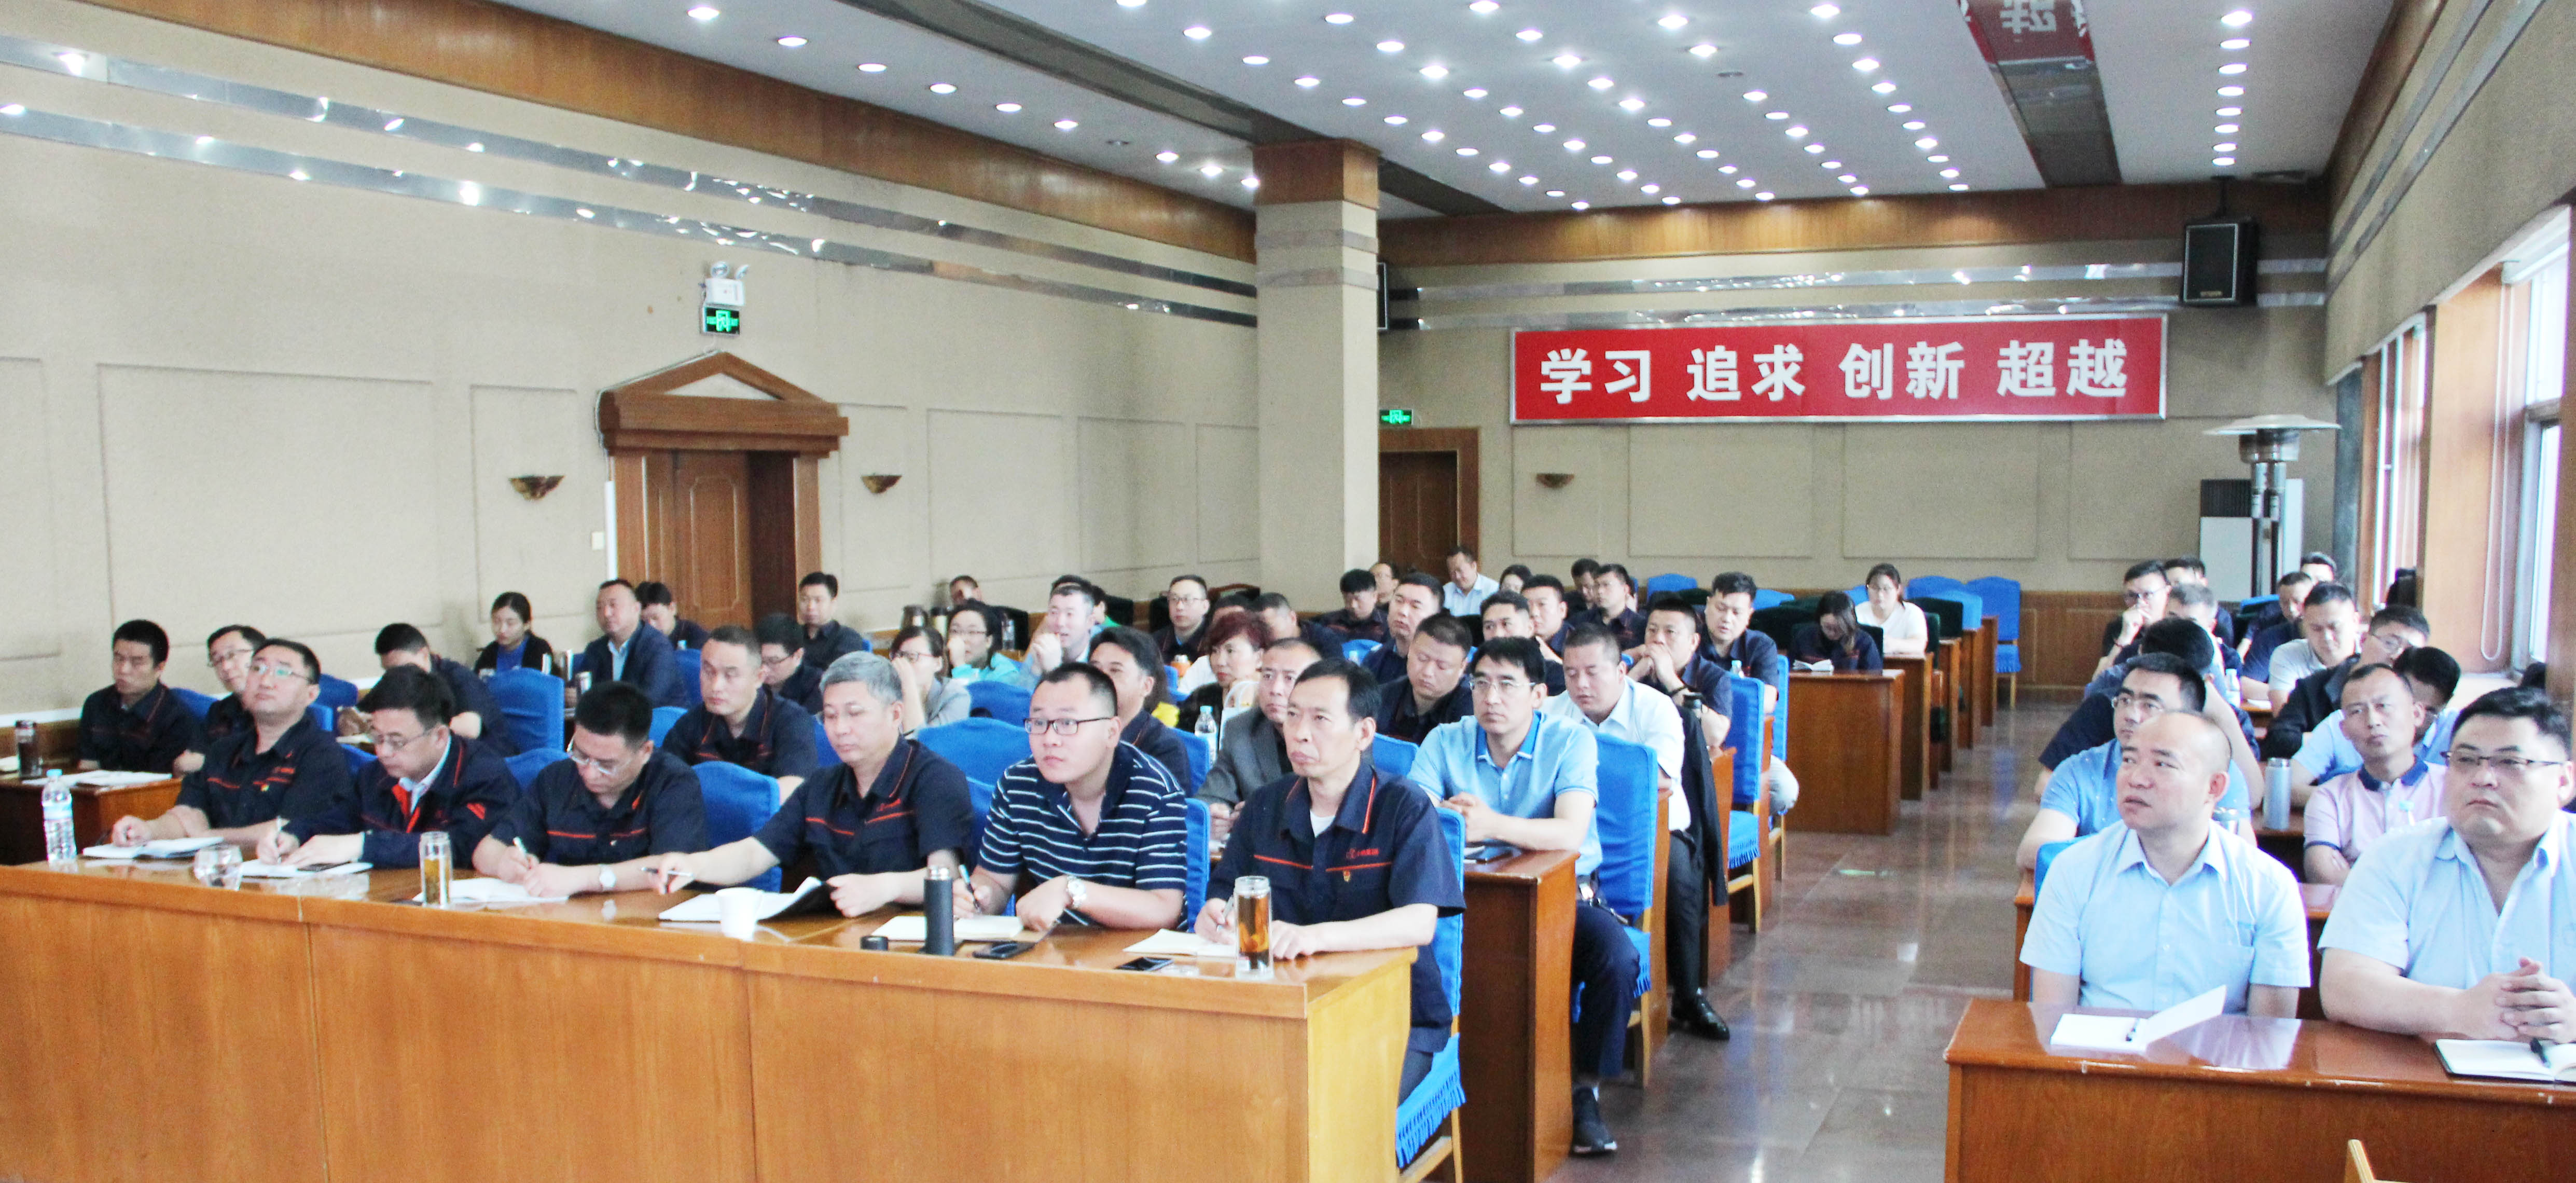 The 2019 annual sales meeting of shandong duckling group home appliance co., LTD was successfully held